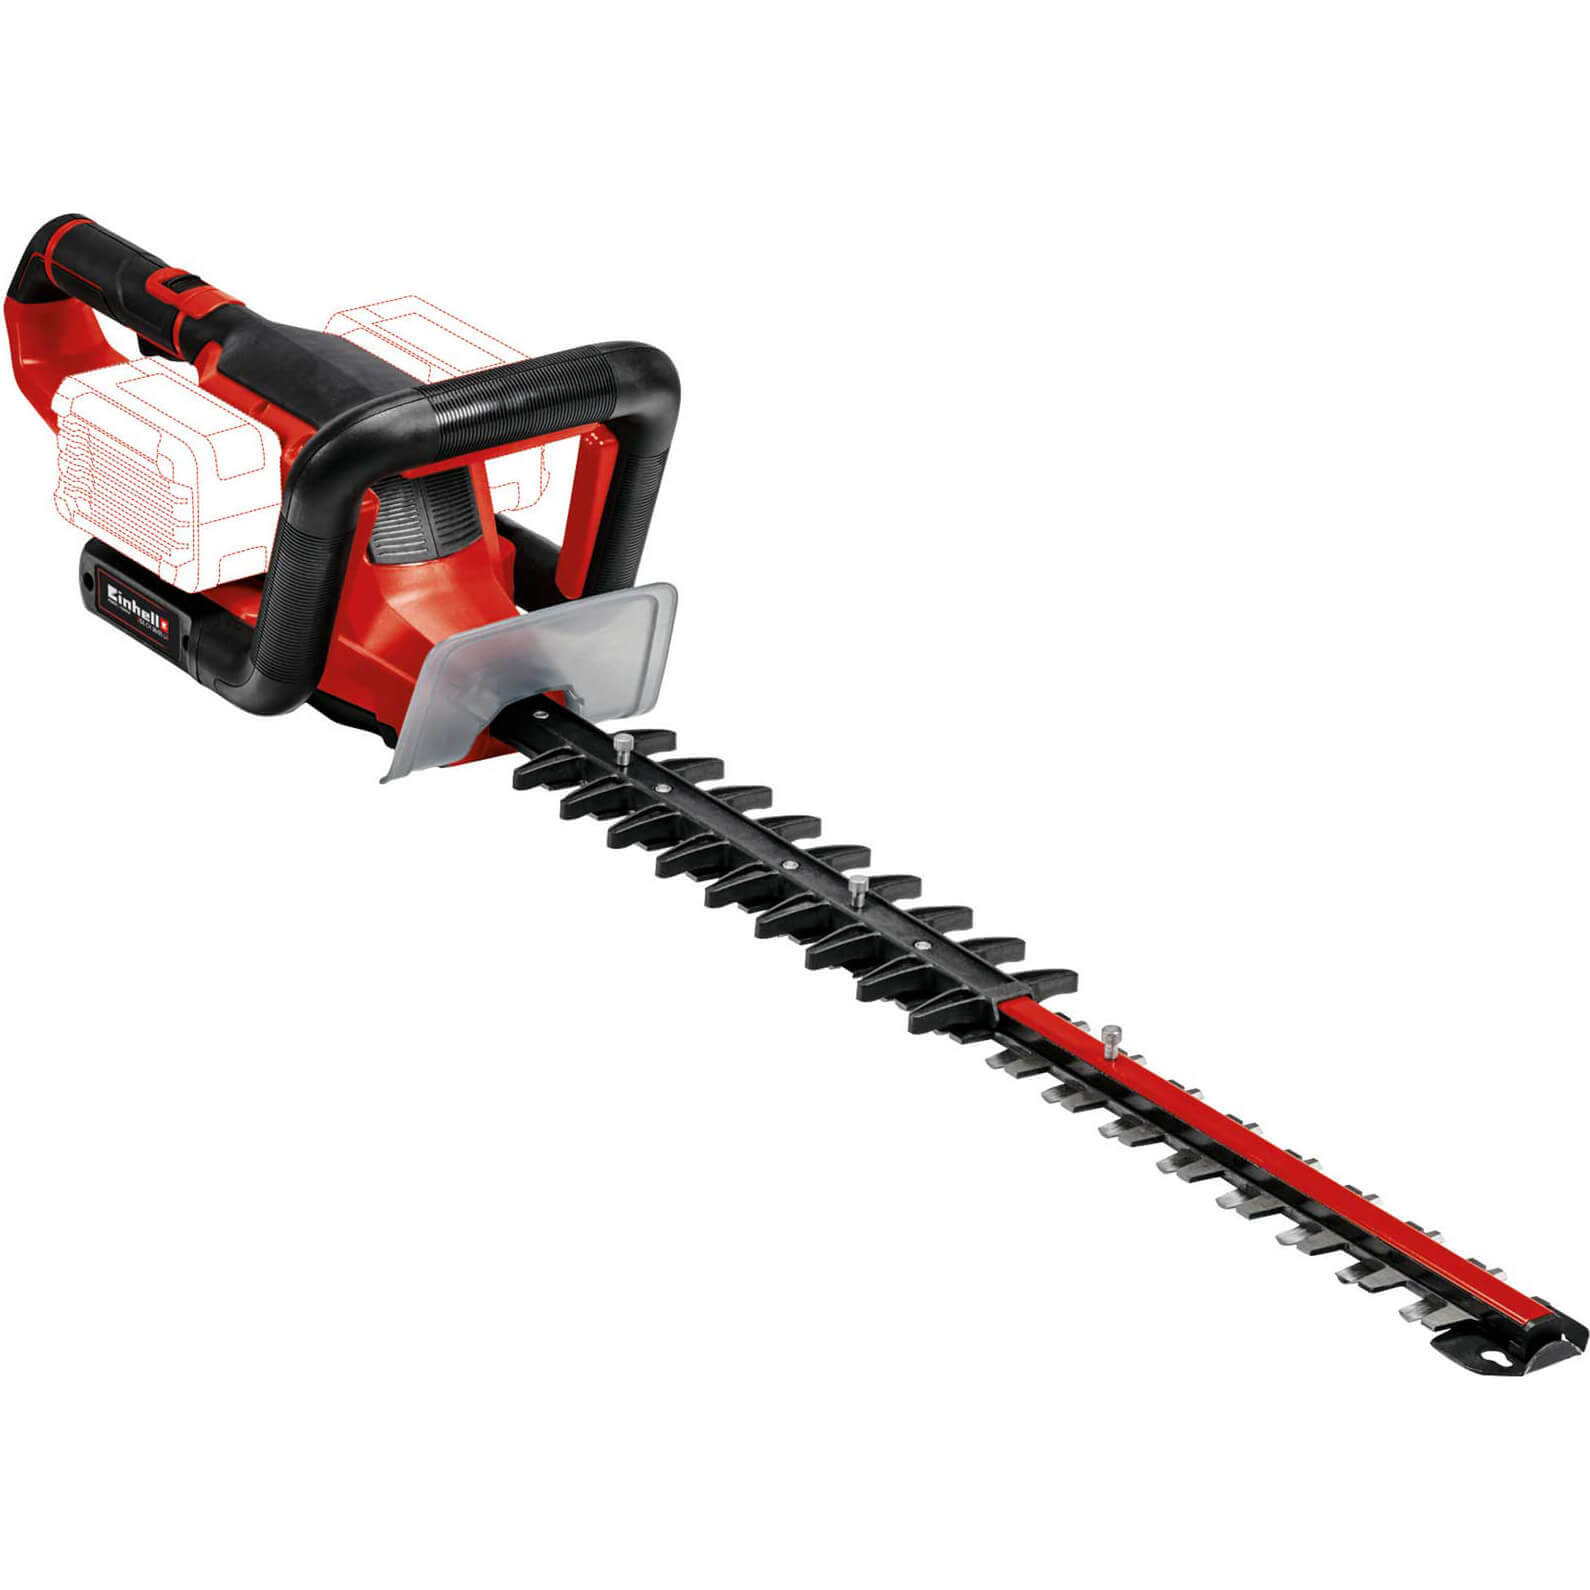 Einhell GE-CH 36/65 Li 36v Cordless Hedge Trimmer 650mm No Batteries No Charger